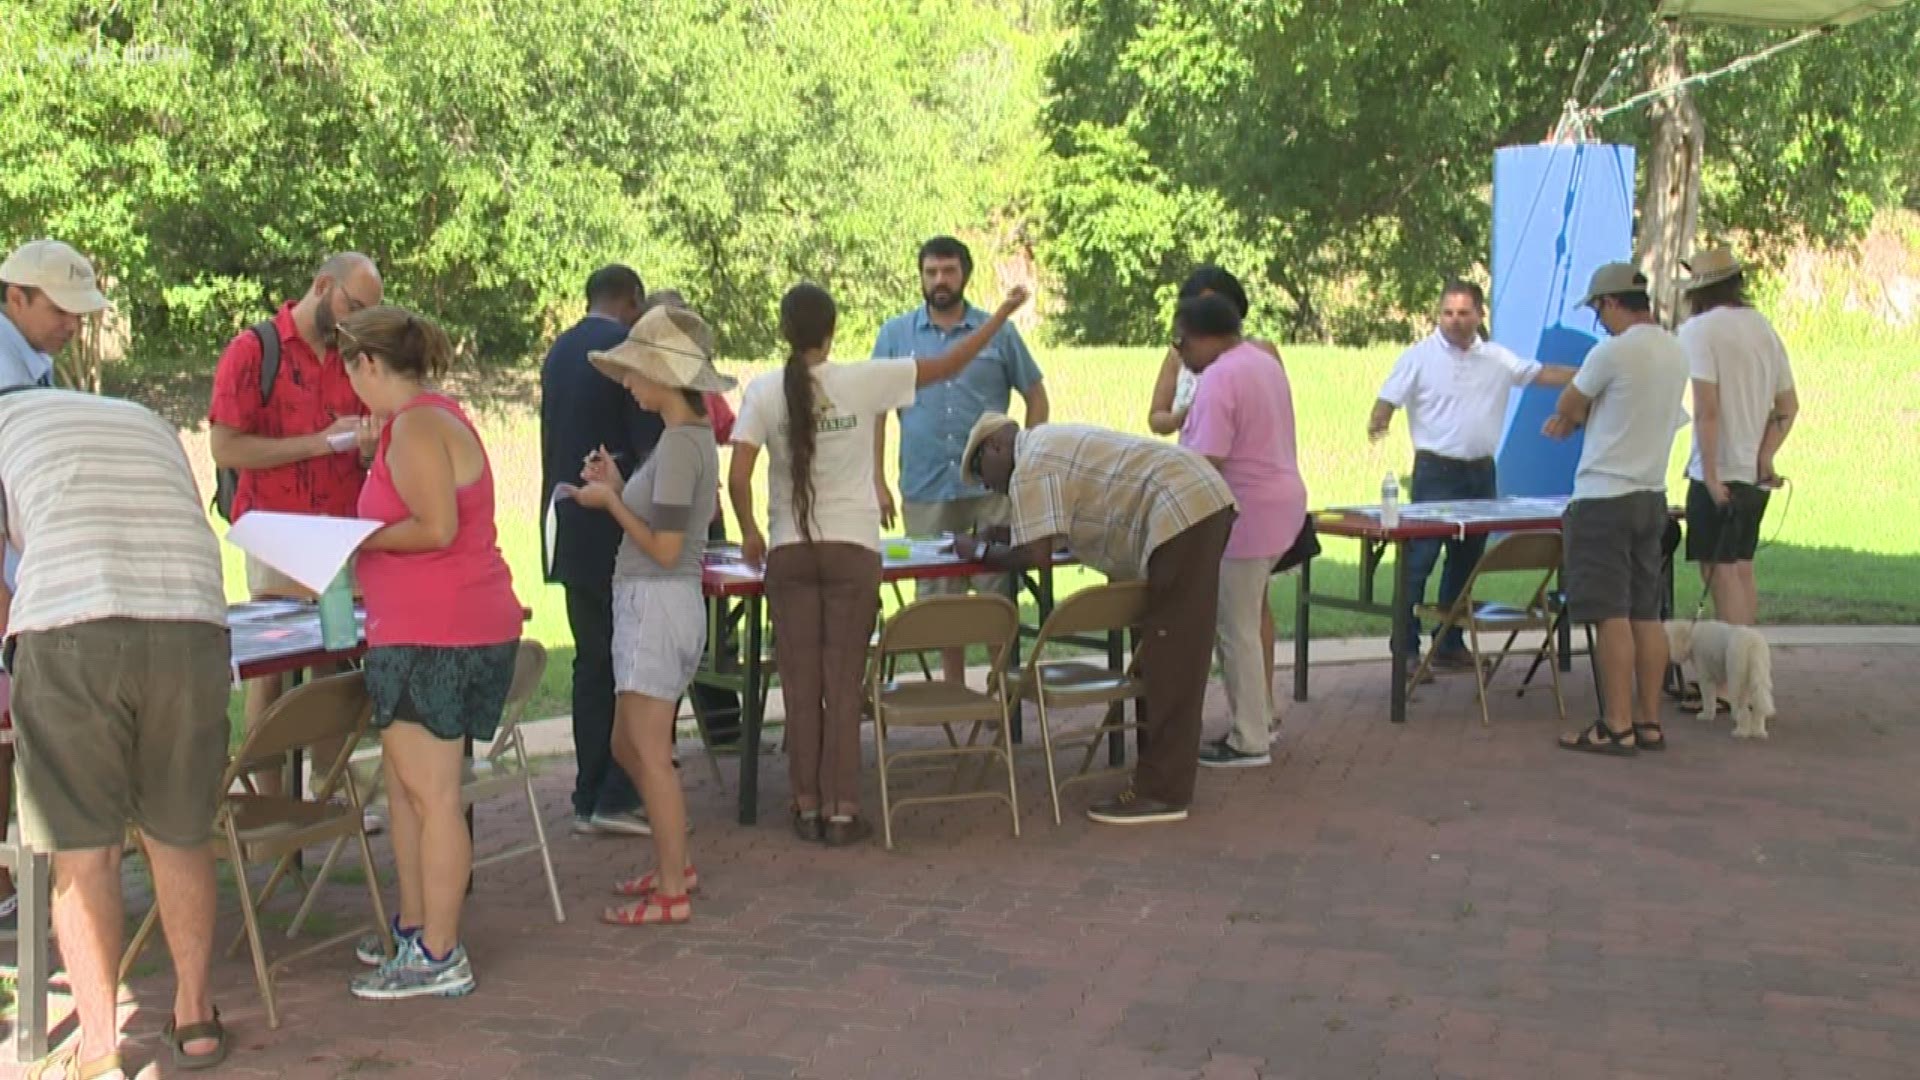 Austin's Parks and Recreation Department held an open house at Givens Park Saturday morning. The department wanted to hear from area neighbors about what improvements the 40-acre park needs.